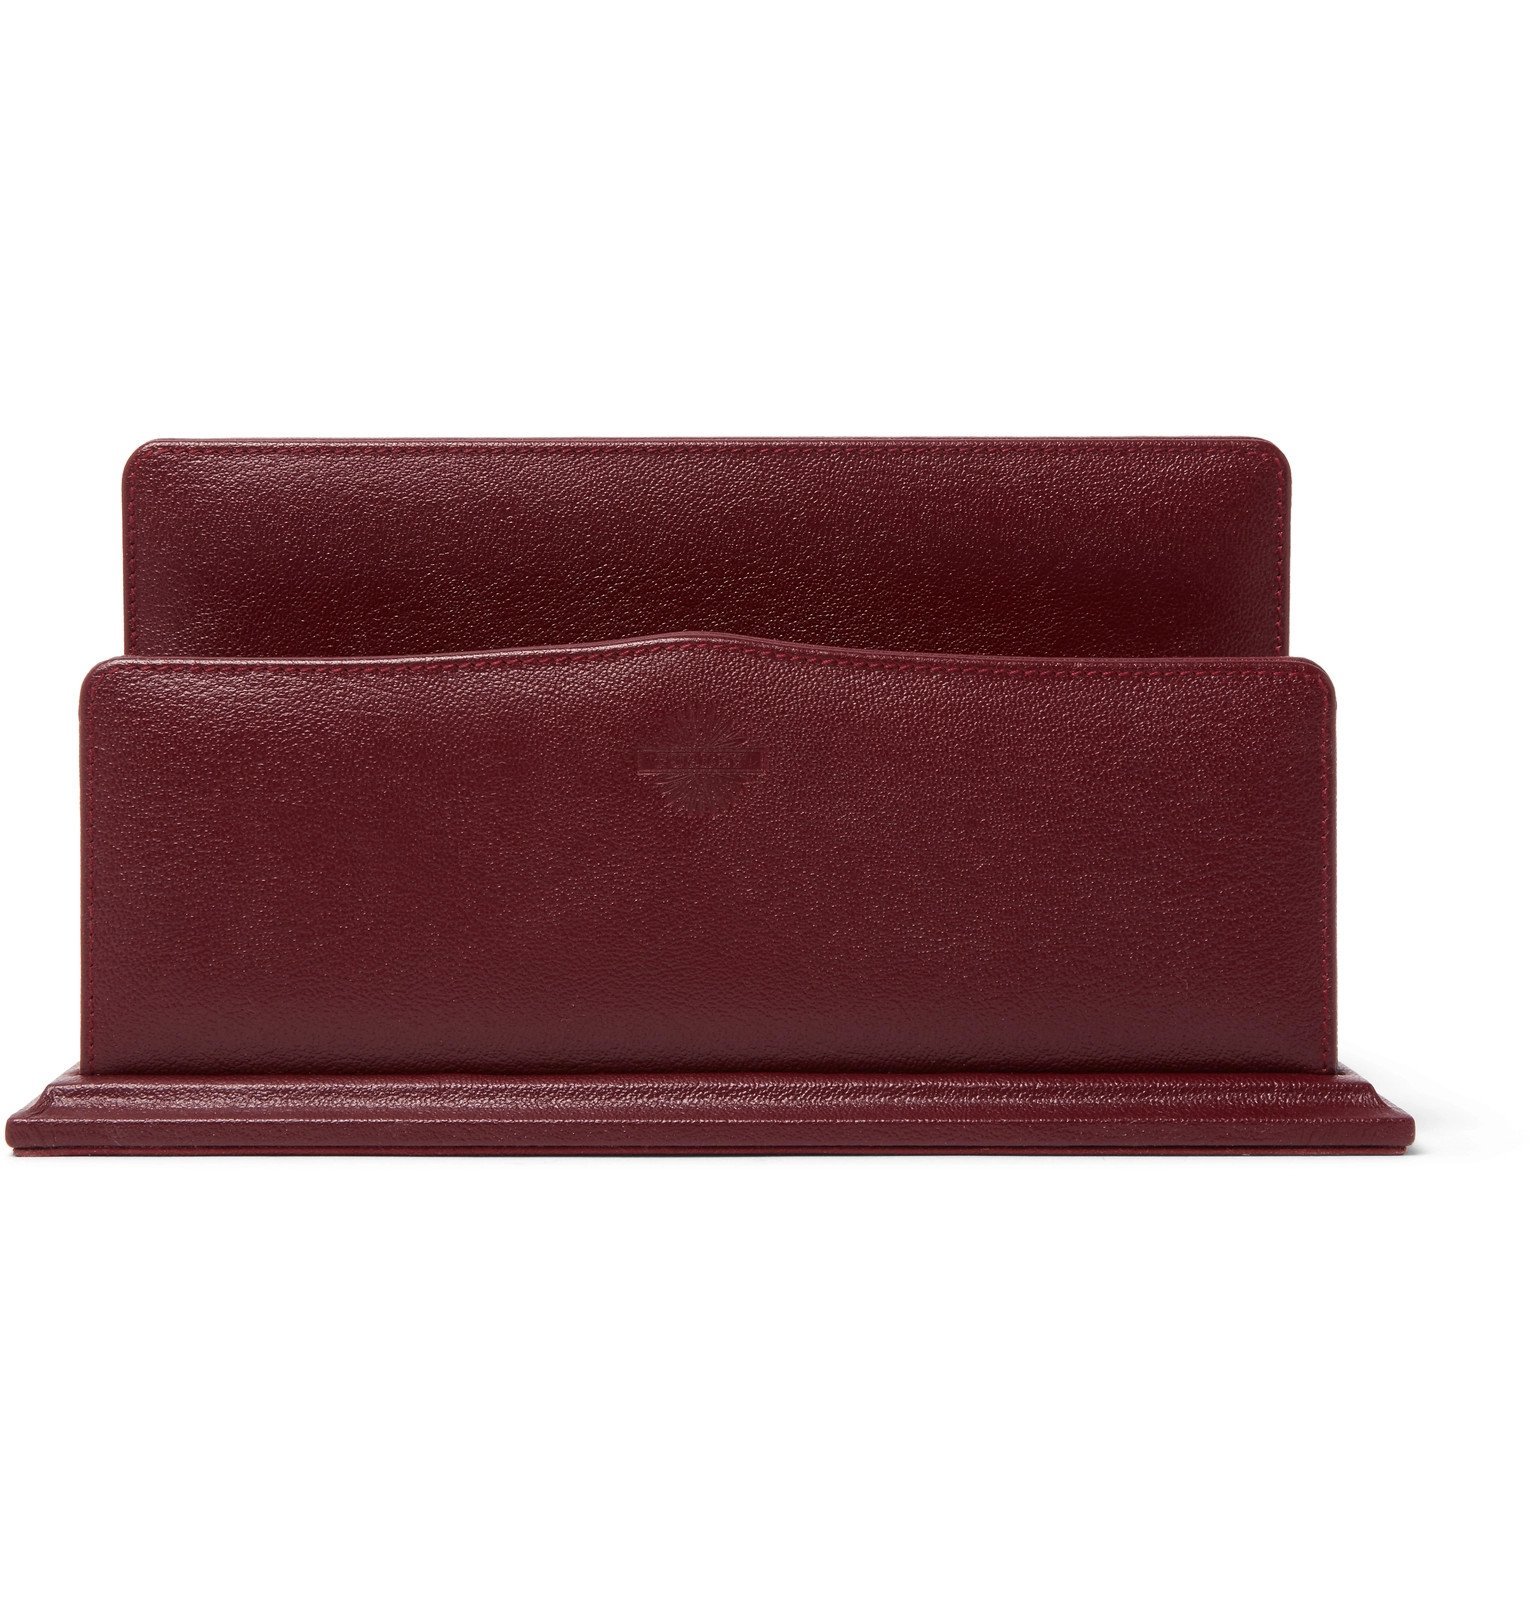 James Purdey & Sons - Textured-Leather Letter Rack - Red Purdey